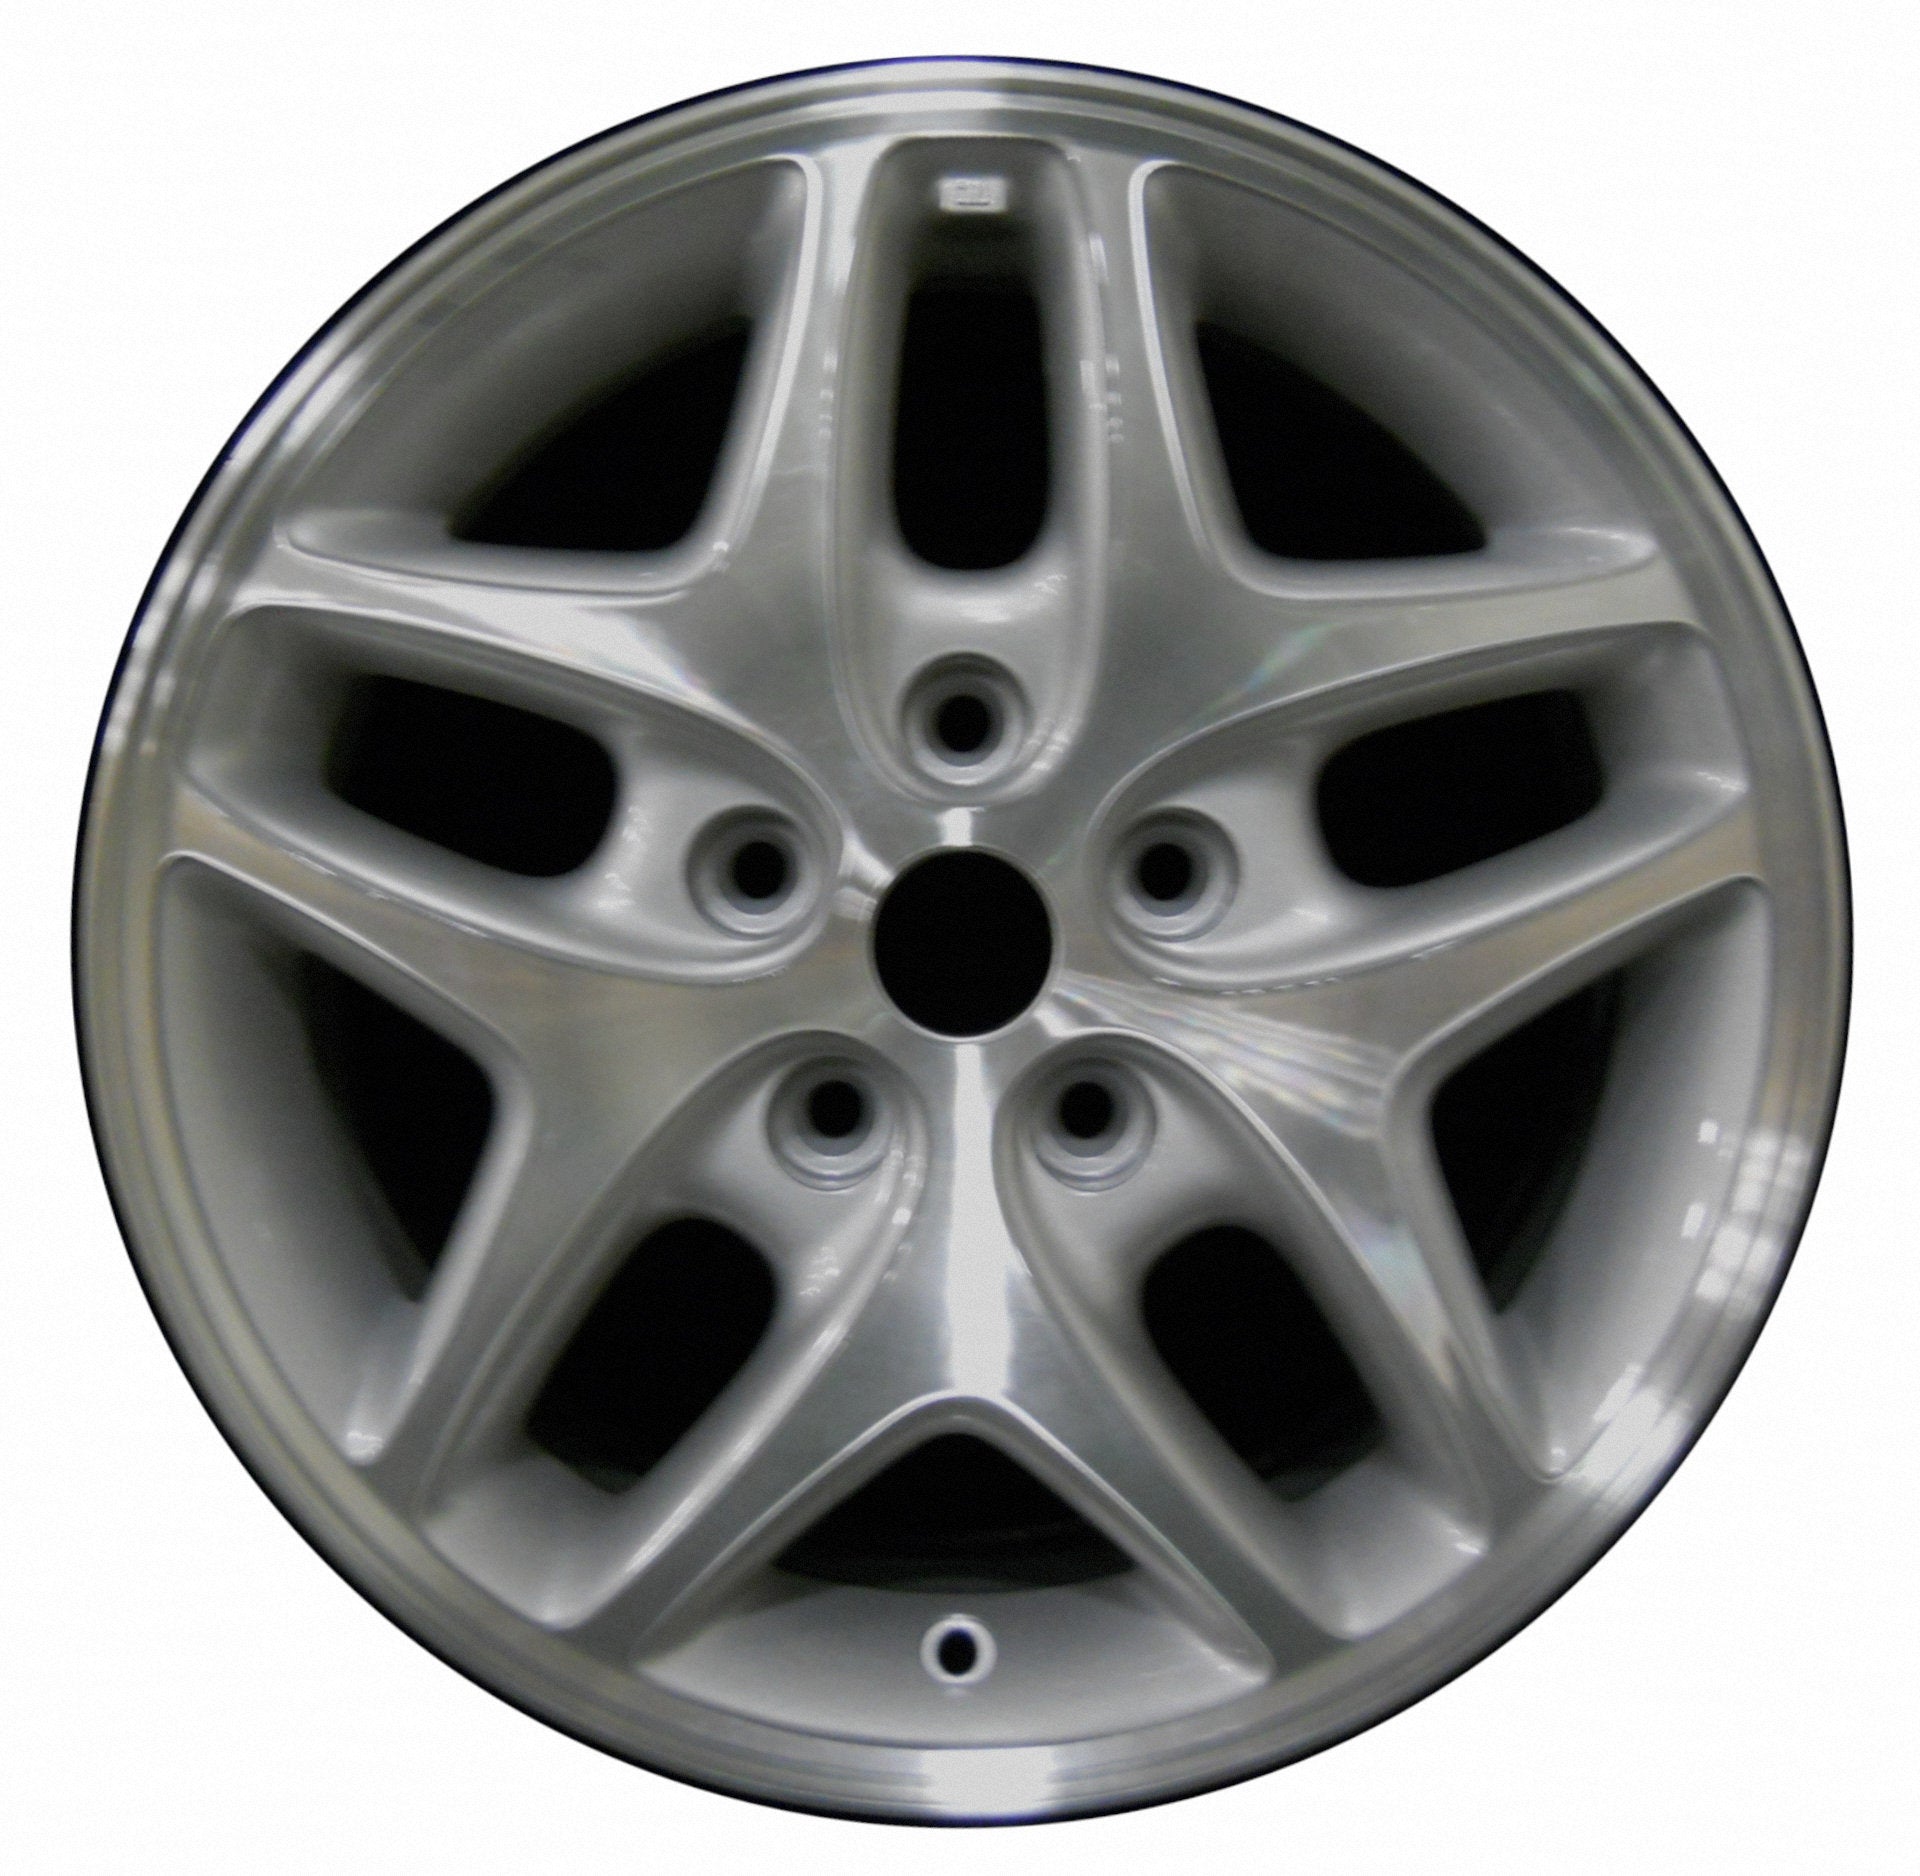 Dodge Intrepid  2001, 2002, 2003, 2004 Factory OEM Car Wheel Size 16x7 Alloy WAO.2135A.PS01.MA